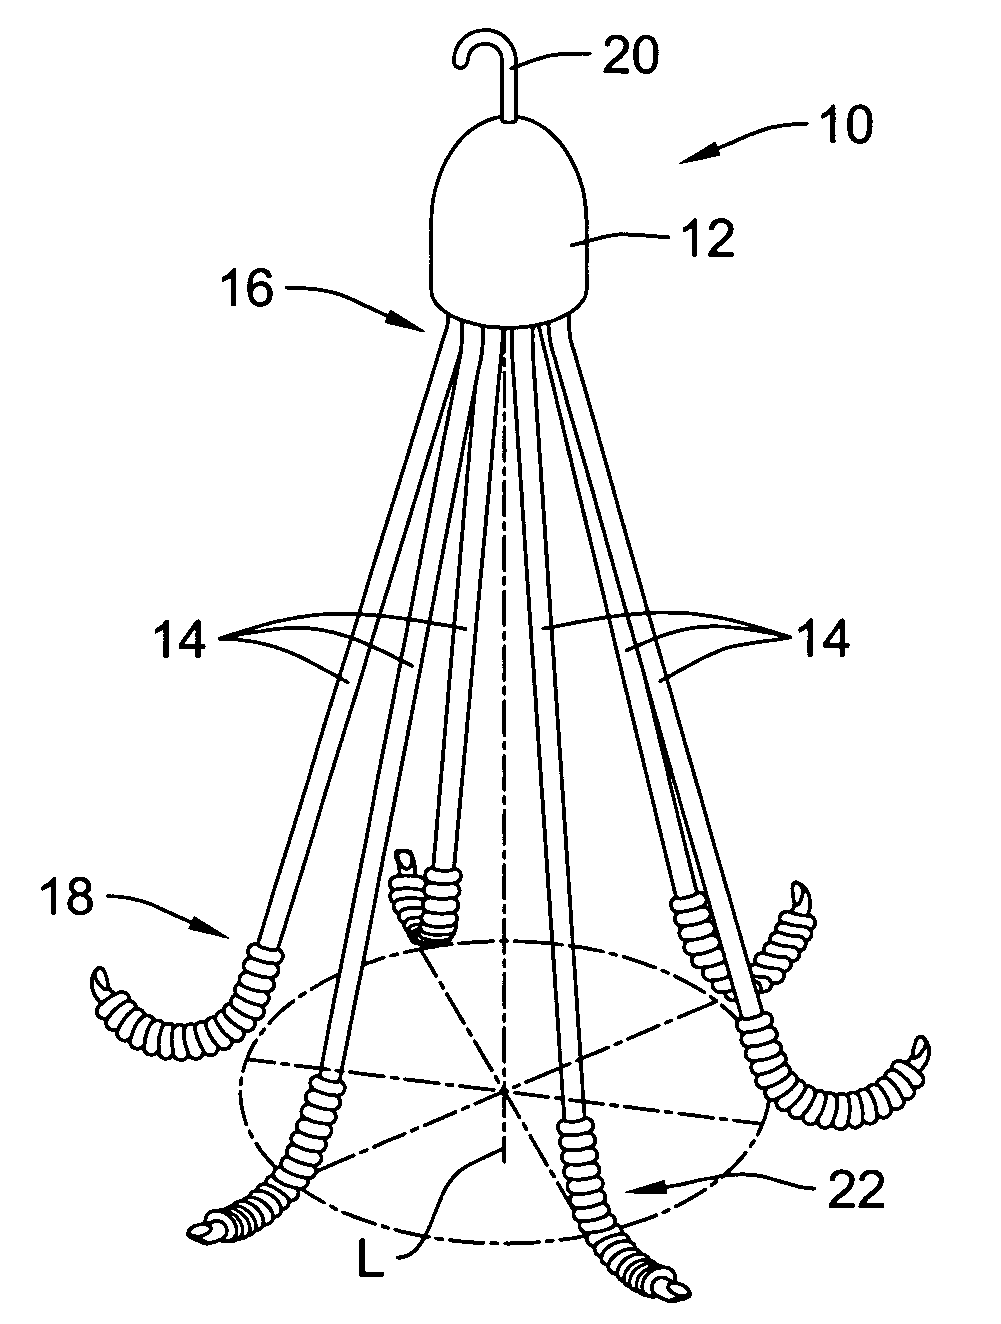 Retrievable intravascular filter with bendable anchoring members